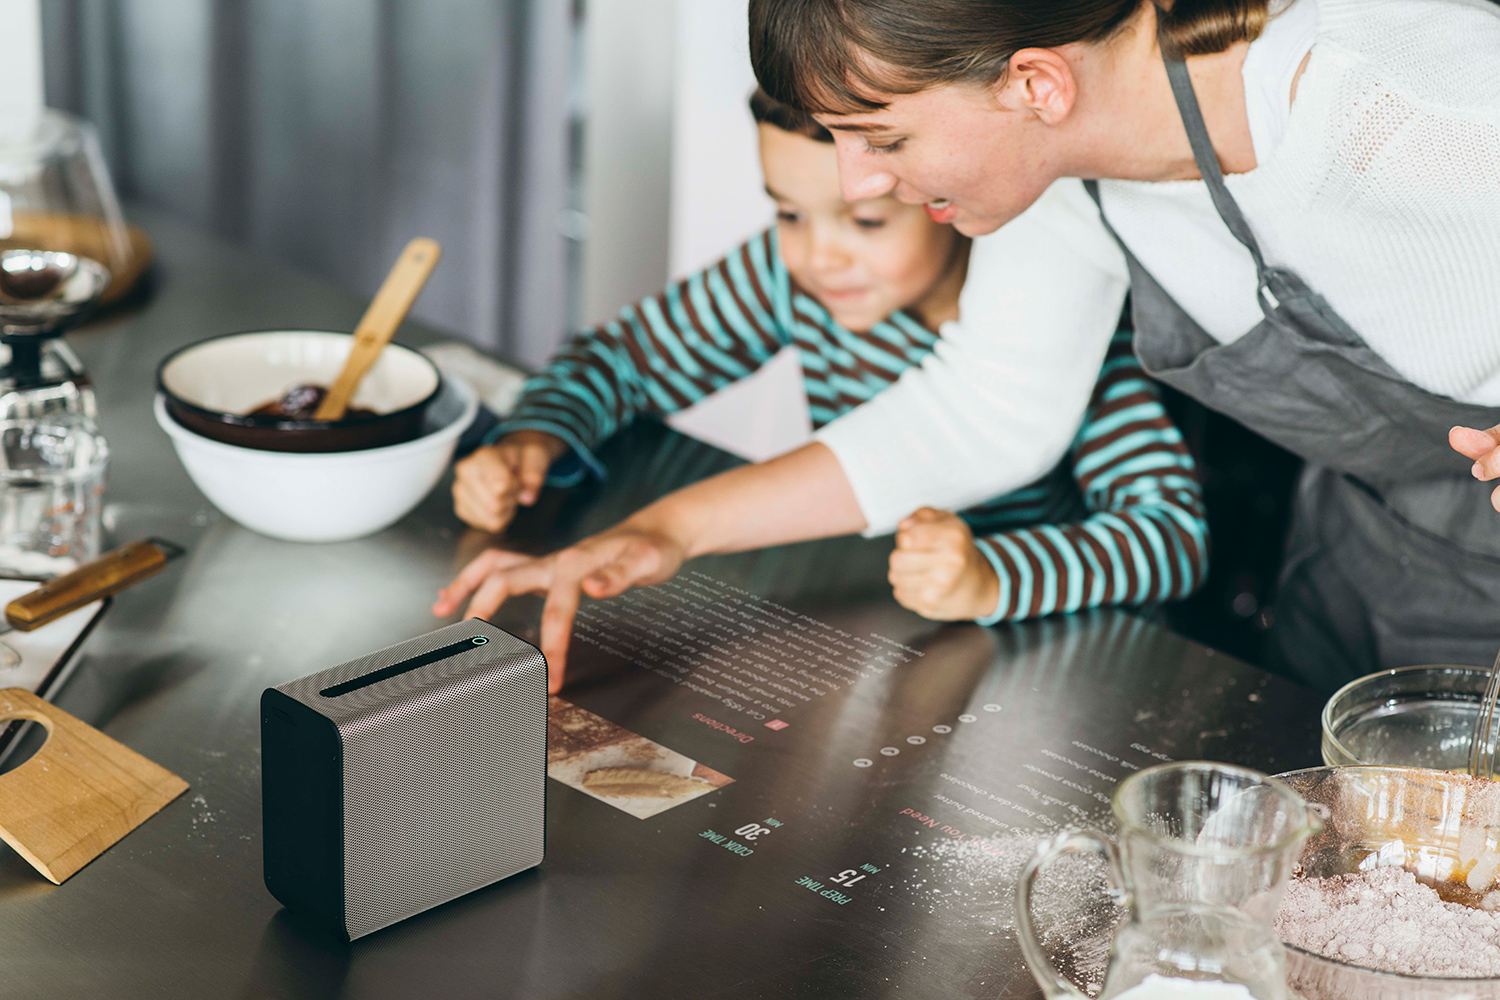 sony xperia touch mwc 2017 01 kitchen gal